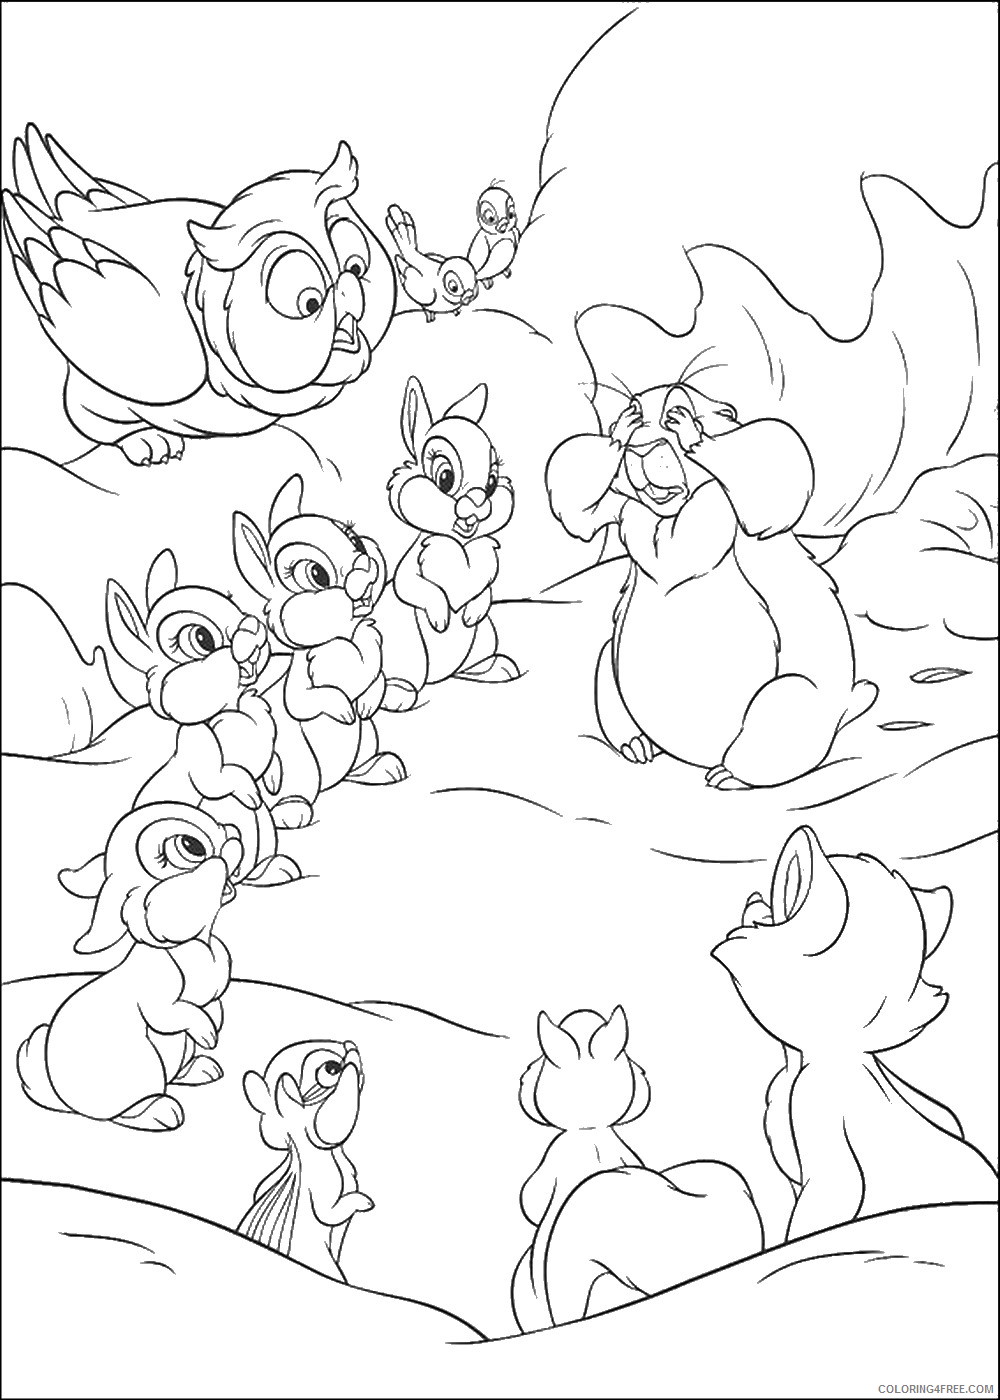 Bambi Coloring Pages Cartoons bambi_cl_26 Printable 2020 0952 Coloring4free